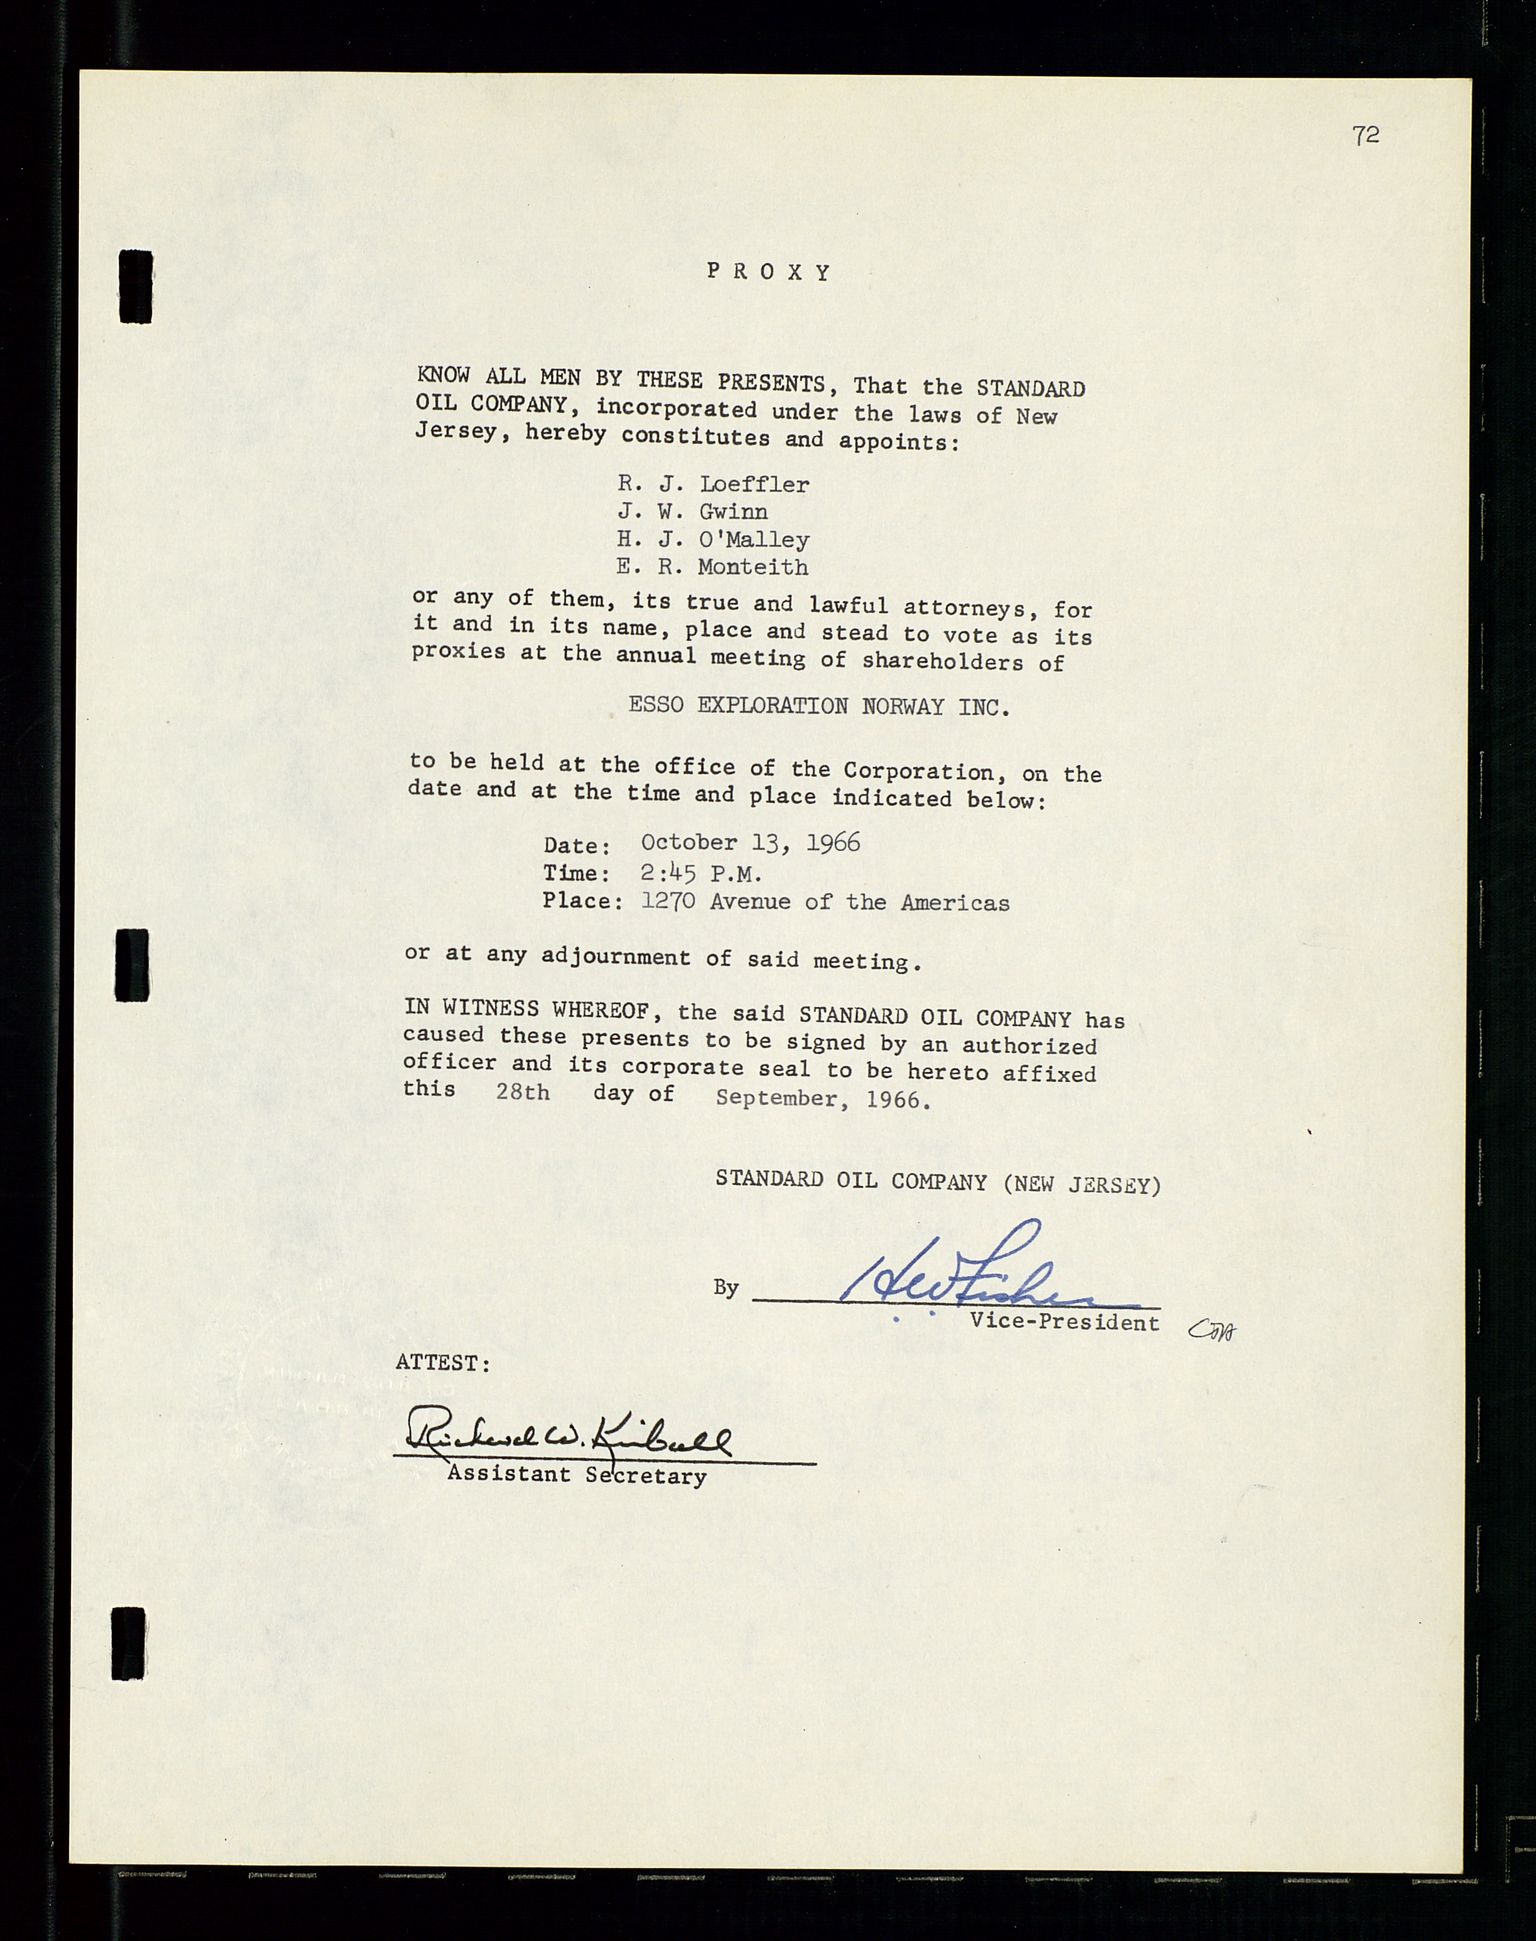 Pa 1512 - Esso Exploration and Production Norway Inc., SAST/A-101917/A/Aa/L0001/0001: Styredokumenter / Corporate records, By-Laws, Board meeting minutes, Incorporations, 1965-1975, p. 72